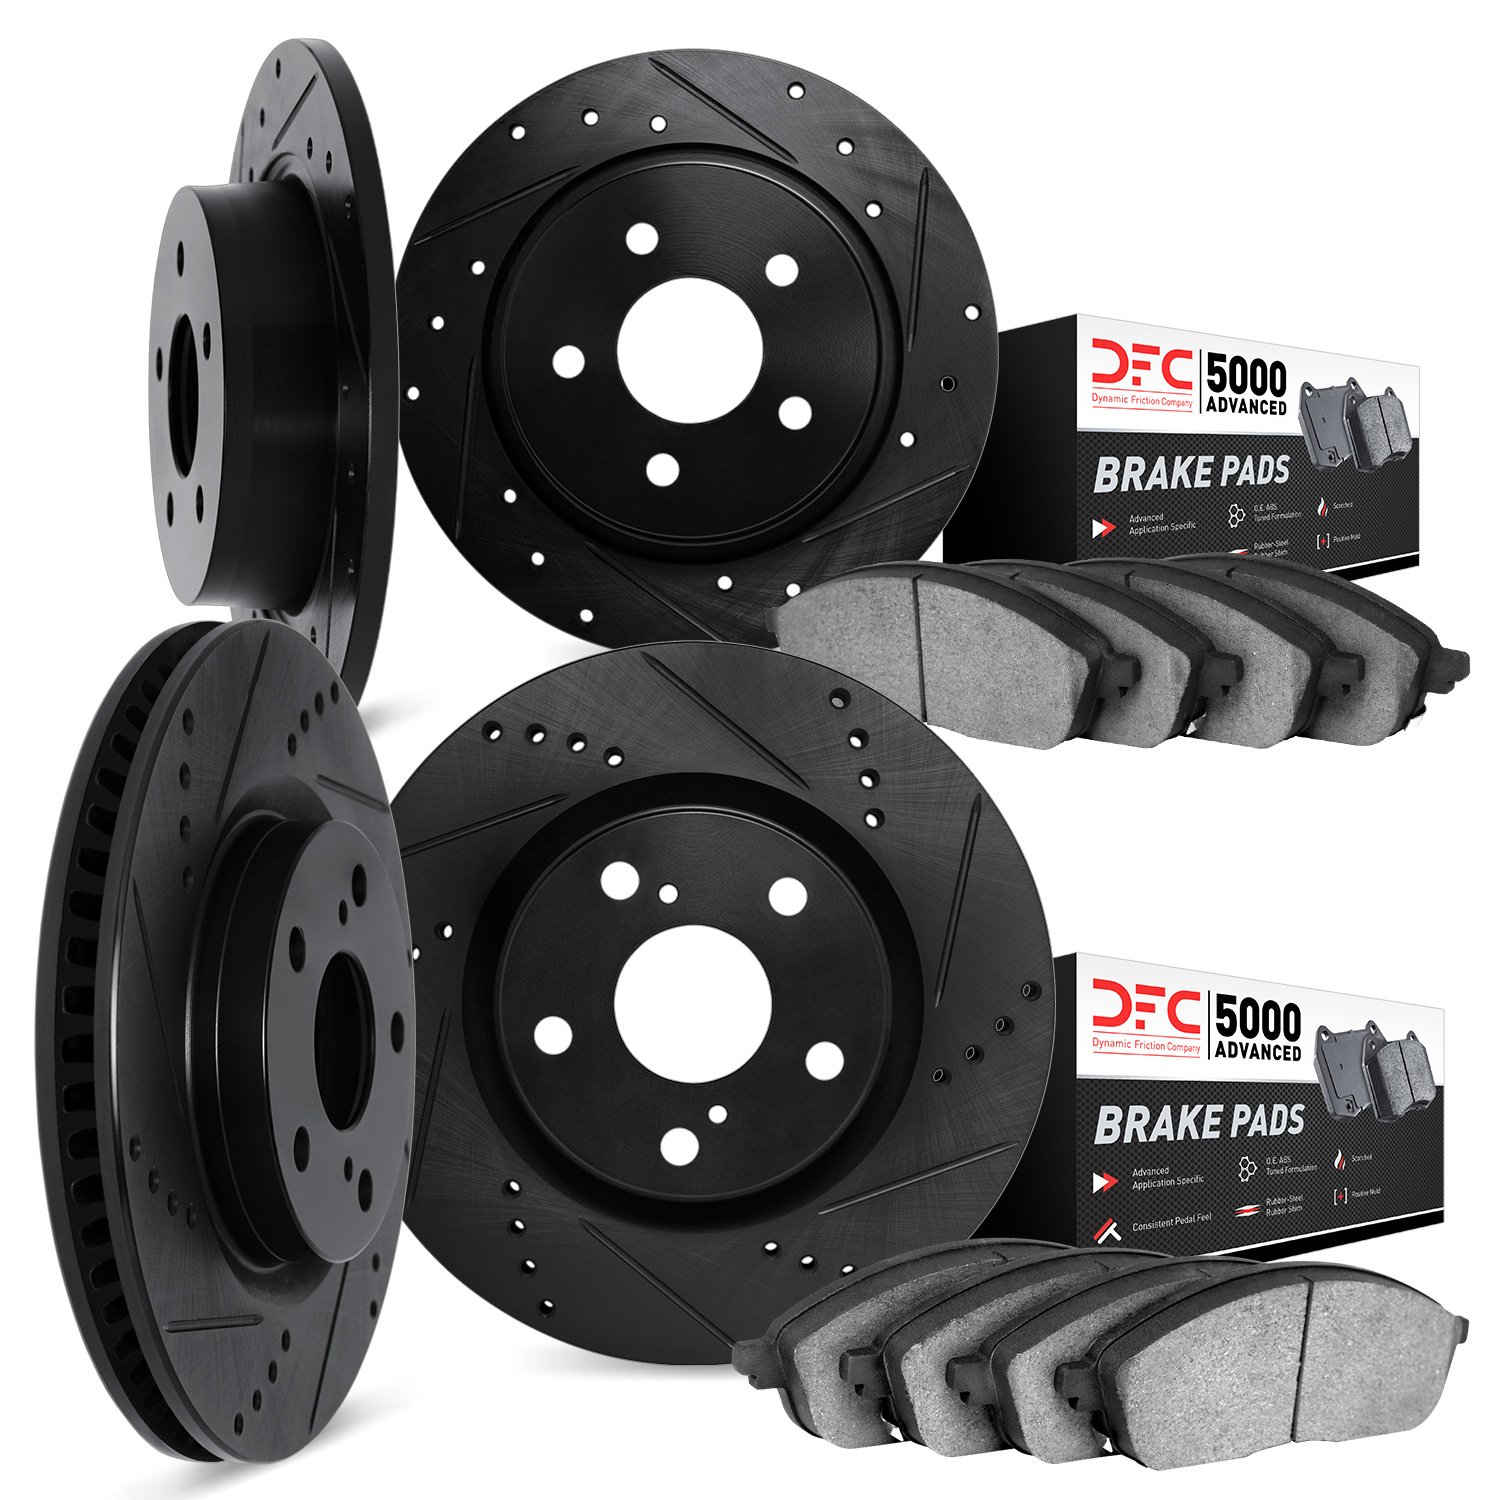 8504-13001 Drilled/Slotted Brake Rotors w/5000 Advanced Brake Pads Kit [Black], 1996-1996 Subaru, Position: Front and Rear